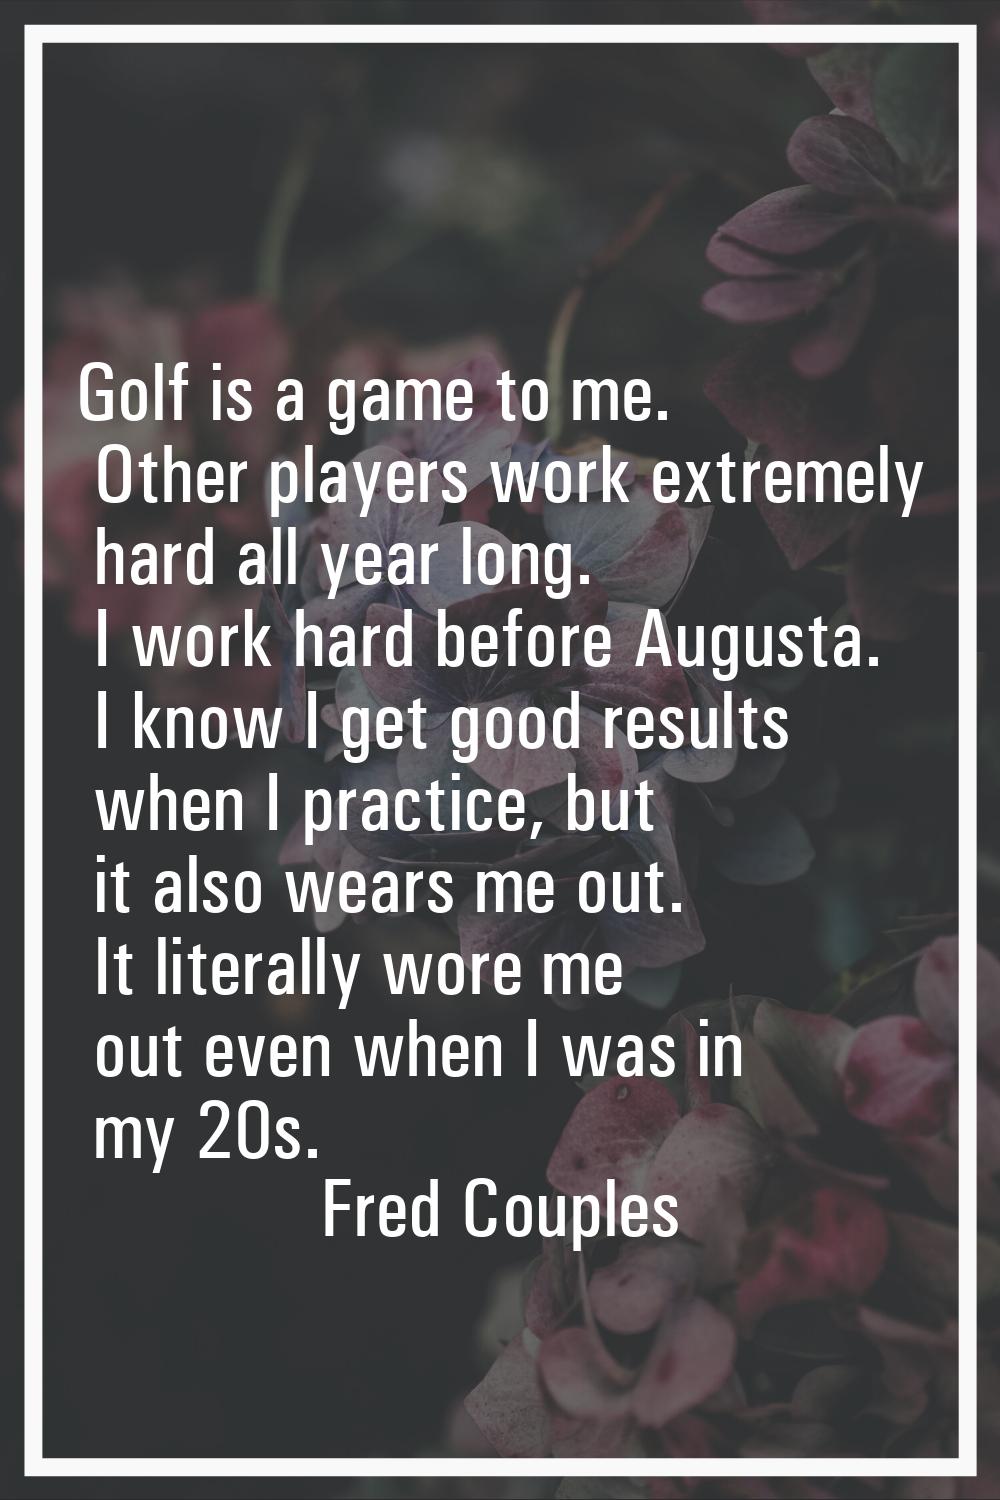 Golf is a game to me. Other players work extremely hard all year long. I work hard before Augusta. 